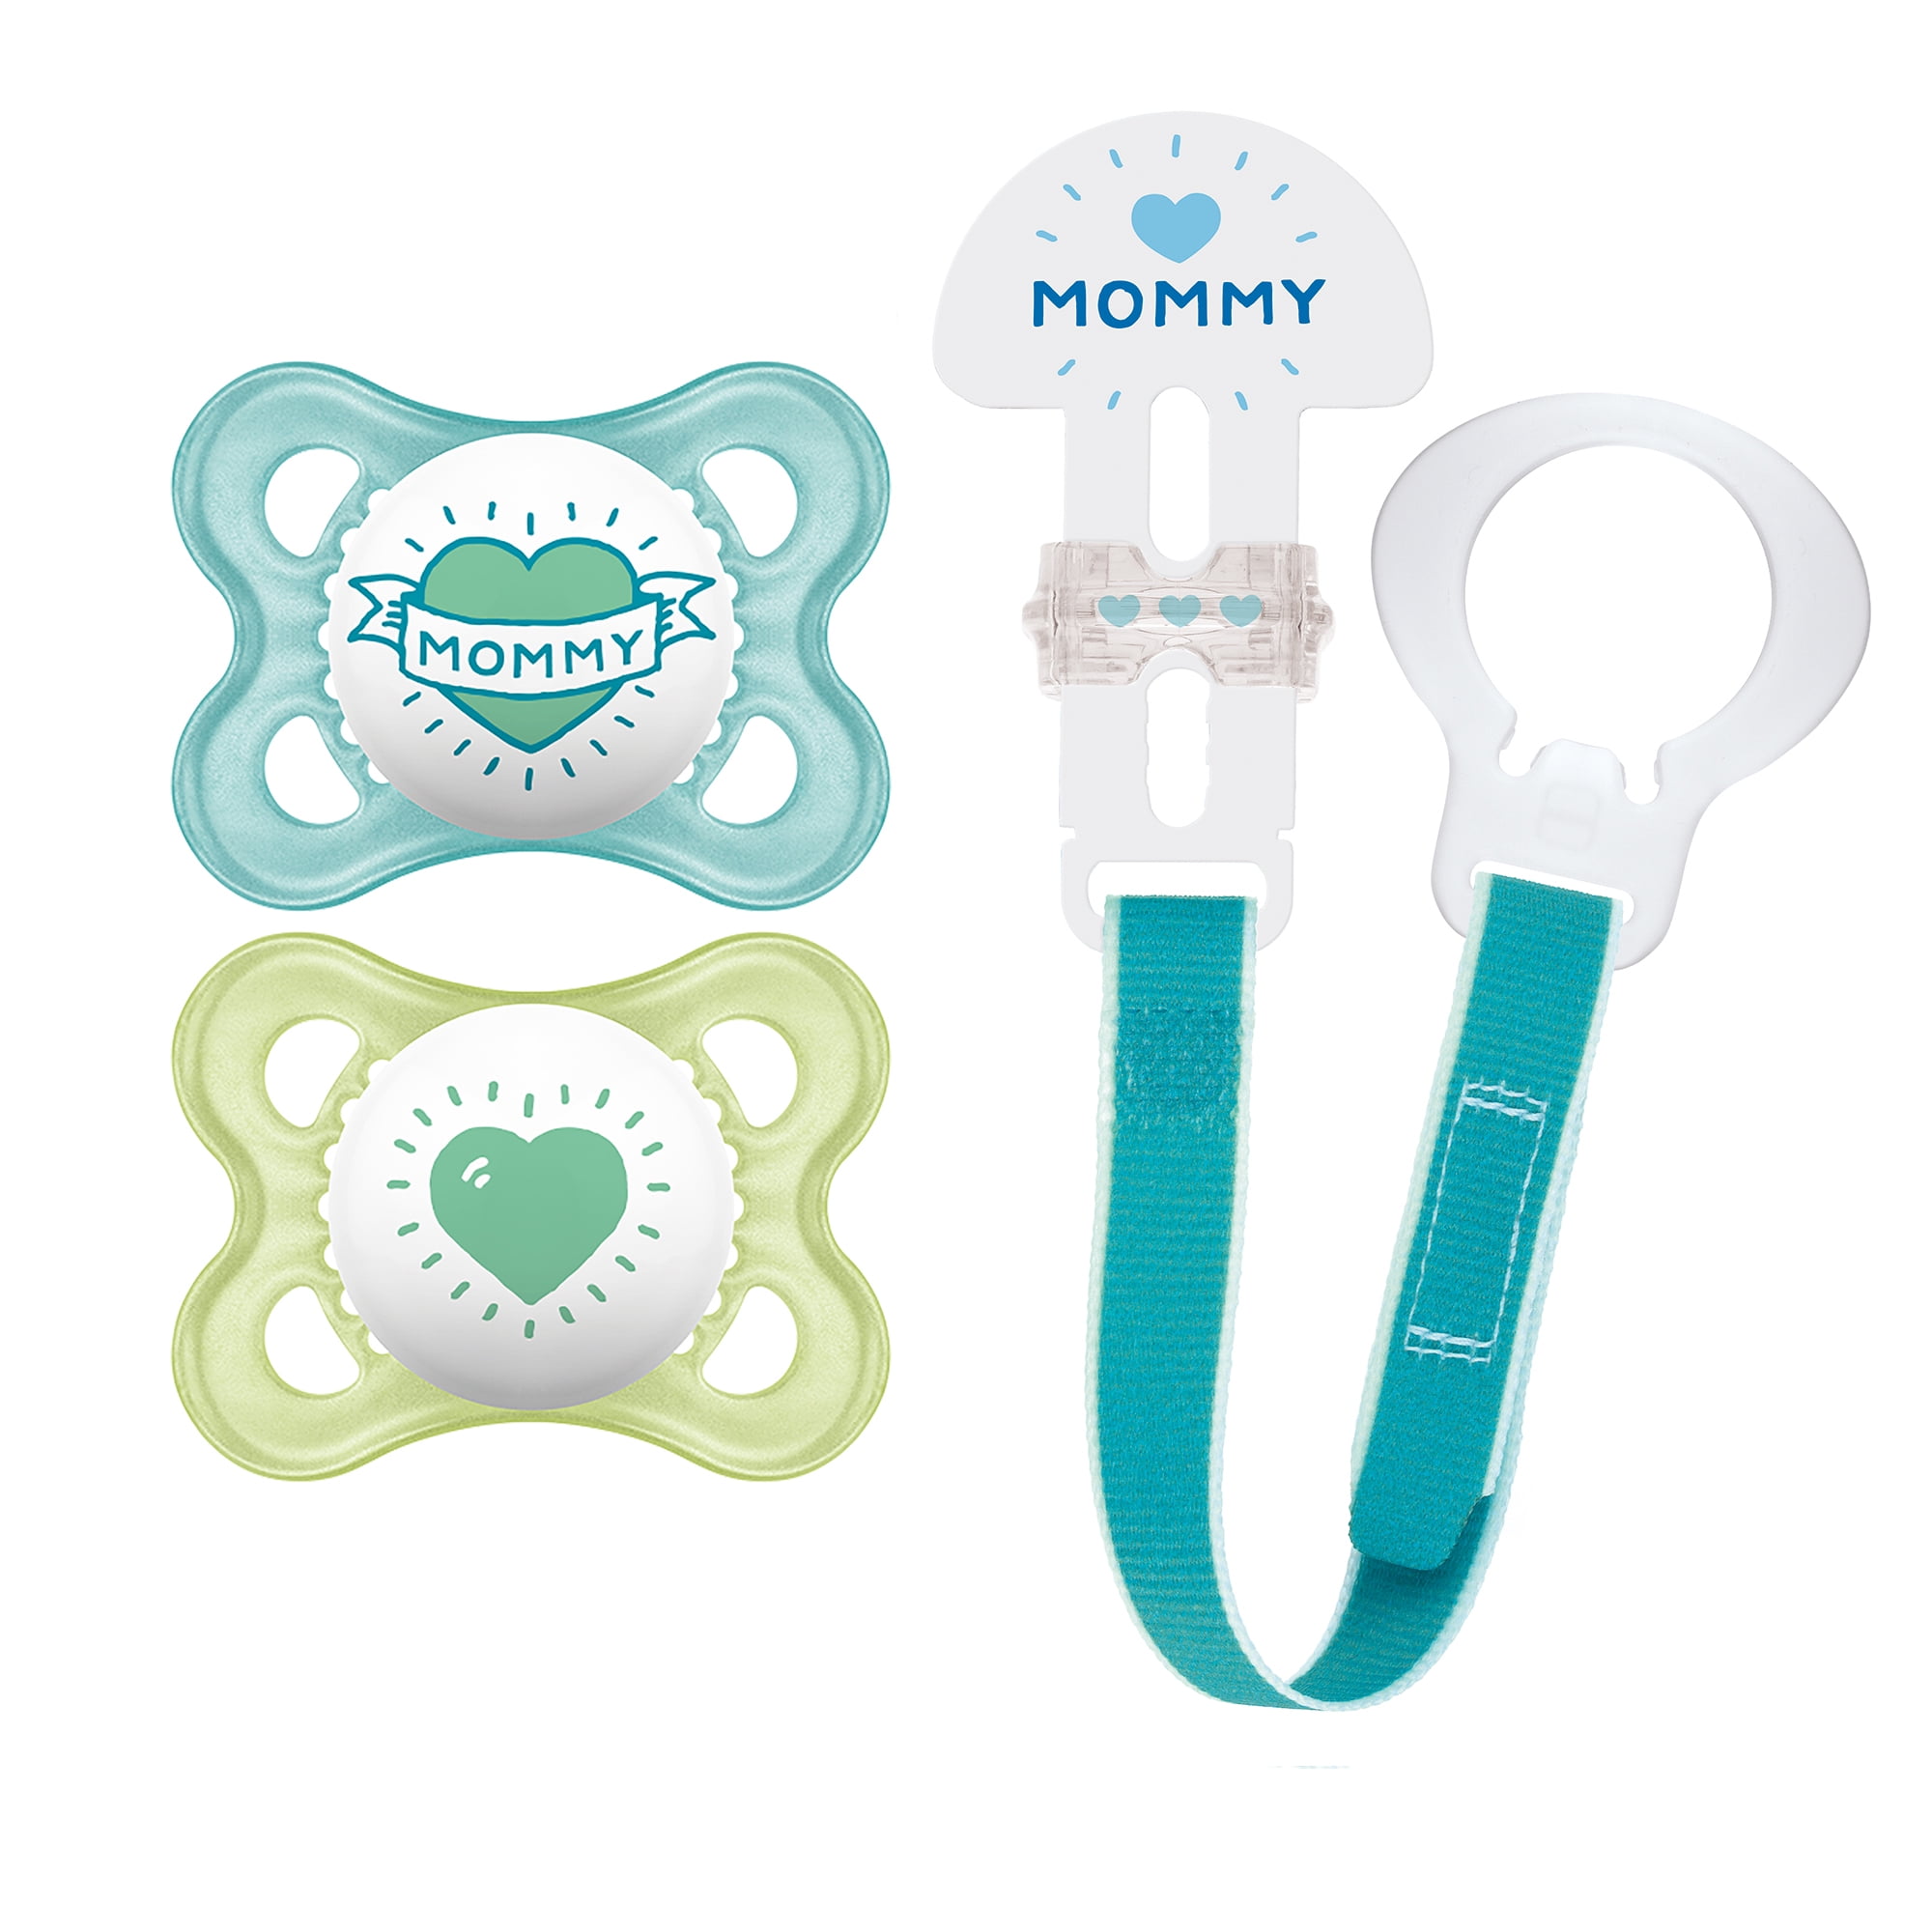 Pacifier Clip for Baby Boy Paci Clip for all pacifiers you pick Soothie,  Nuk, Mam Avent pacifier holder, Daycare pacifier holder